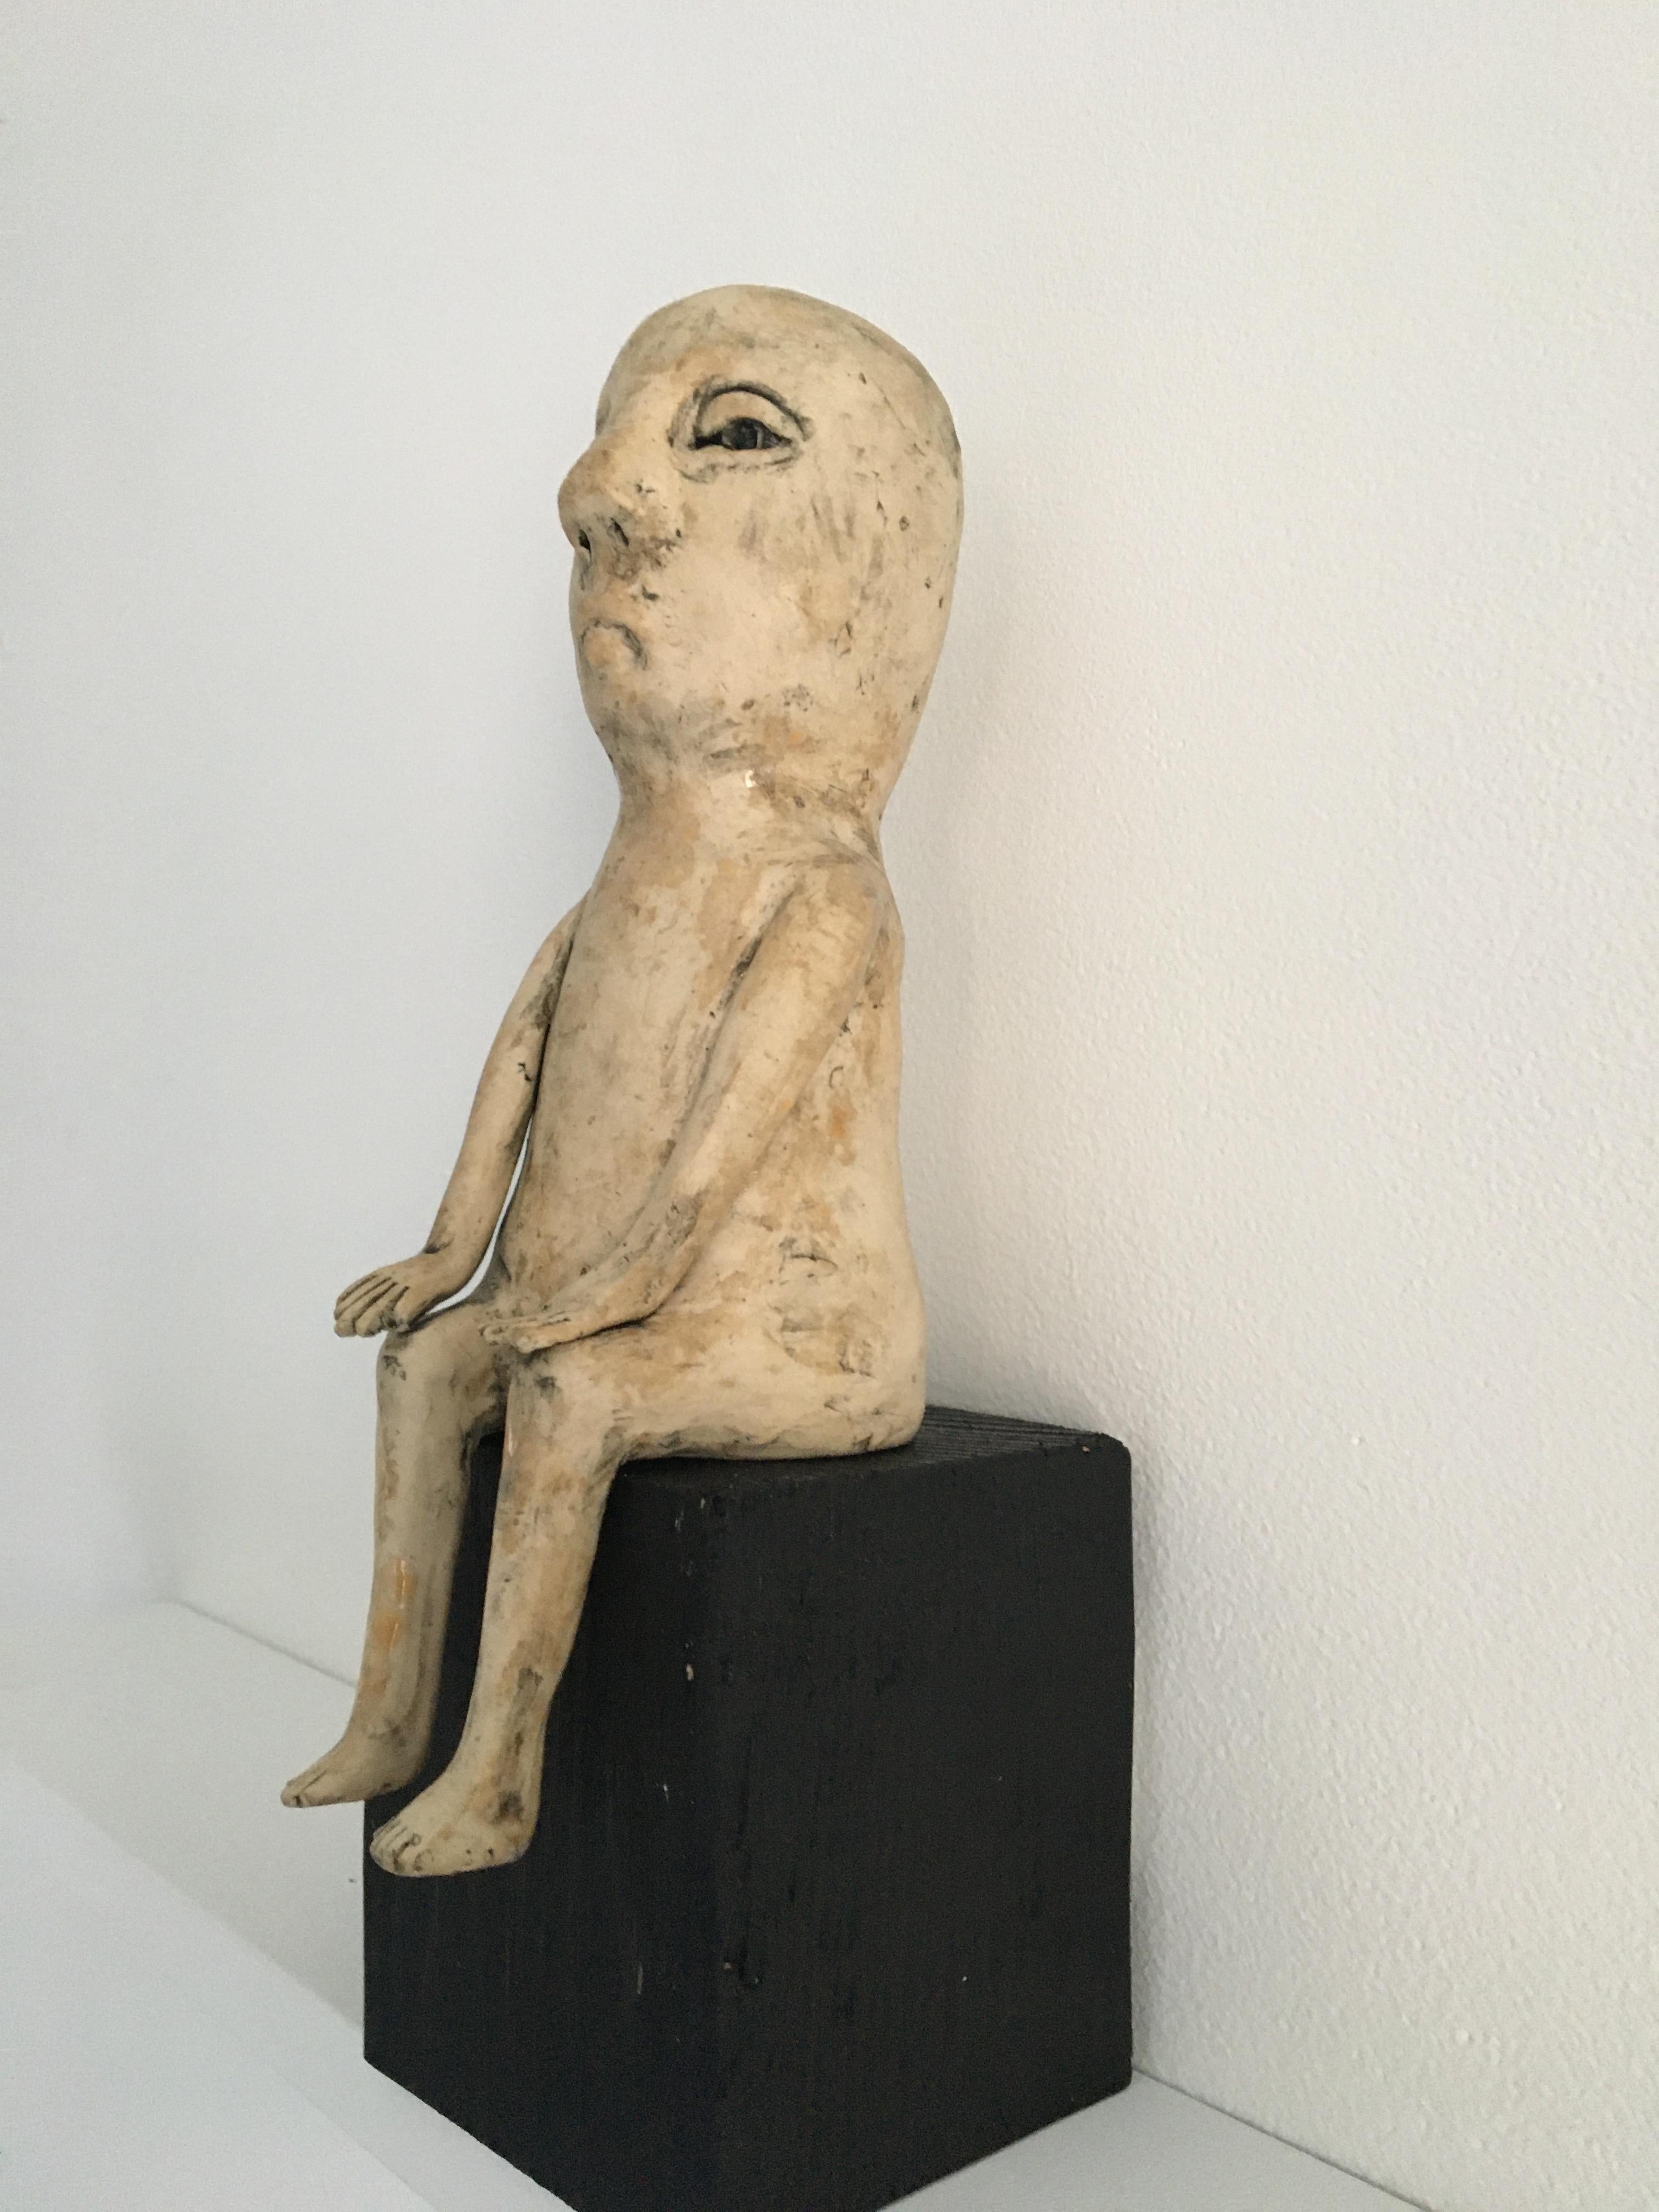 Ceramic figure on wood block: 'Enough of this' - Sculpture by Ashley Benton